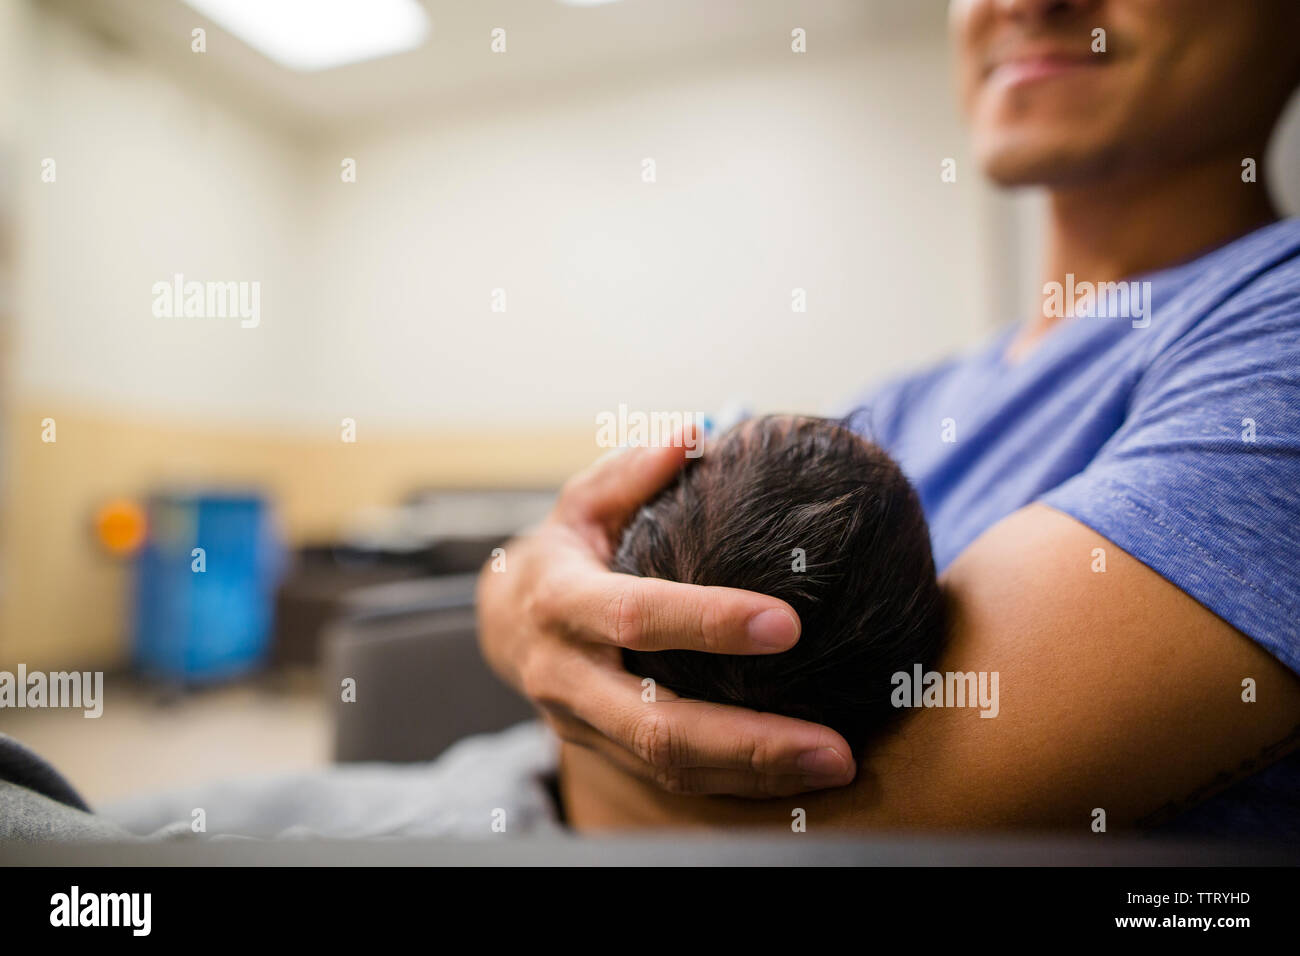 a proud, smiling new father cradles is newborn daughter in his arms Stock Photo